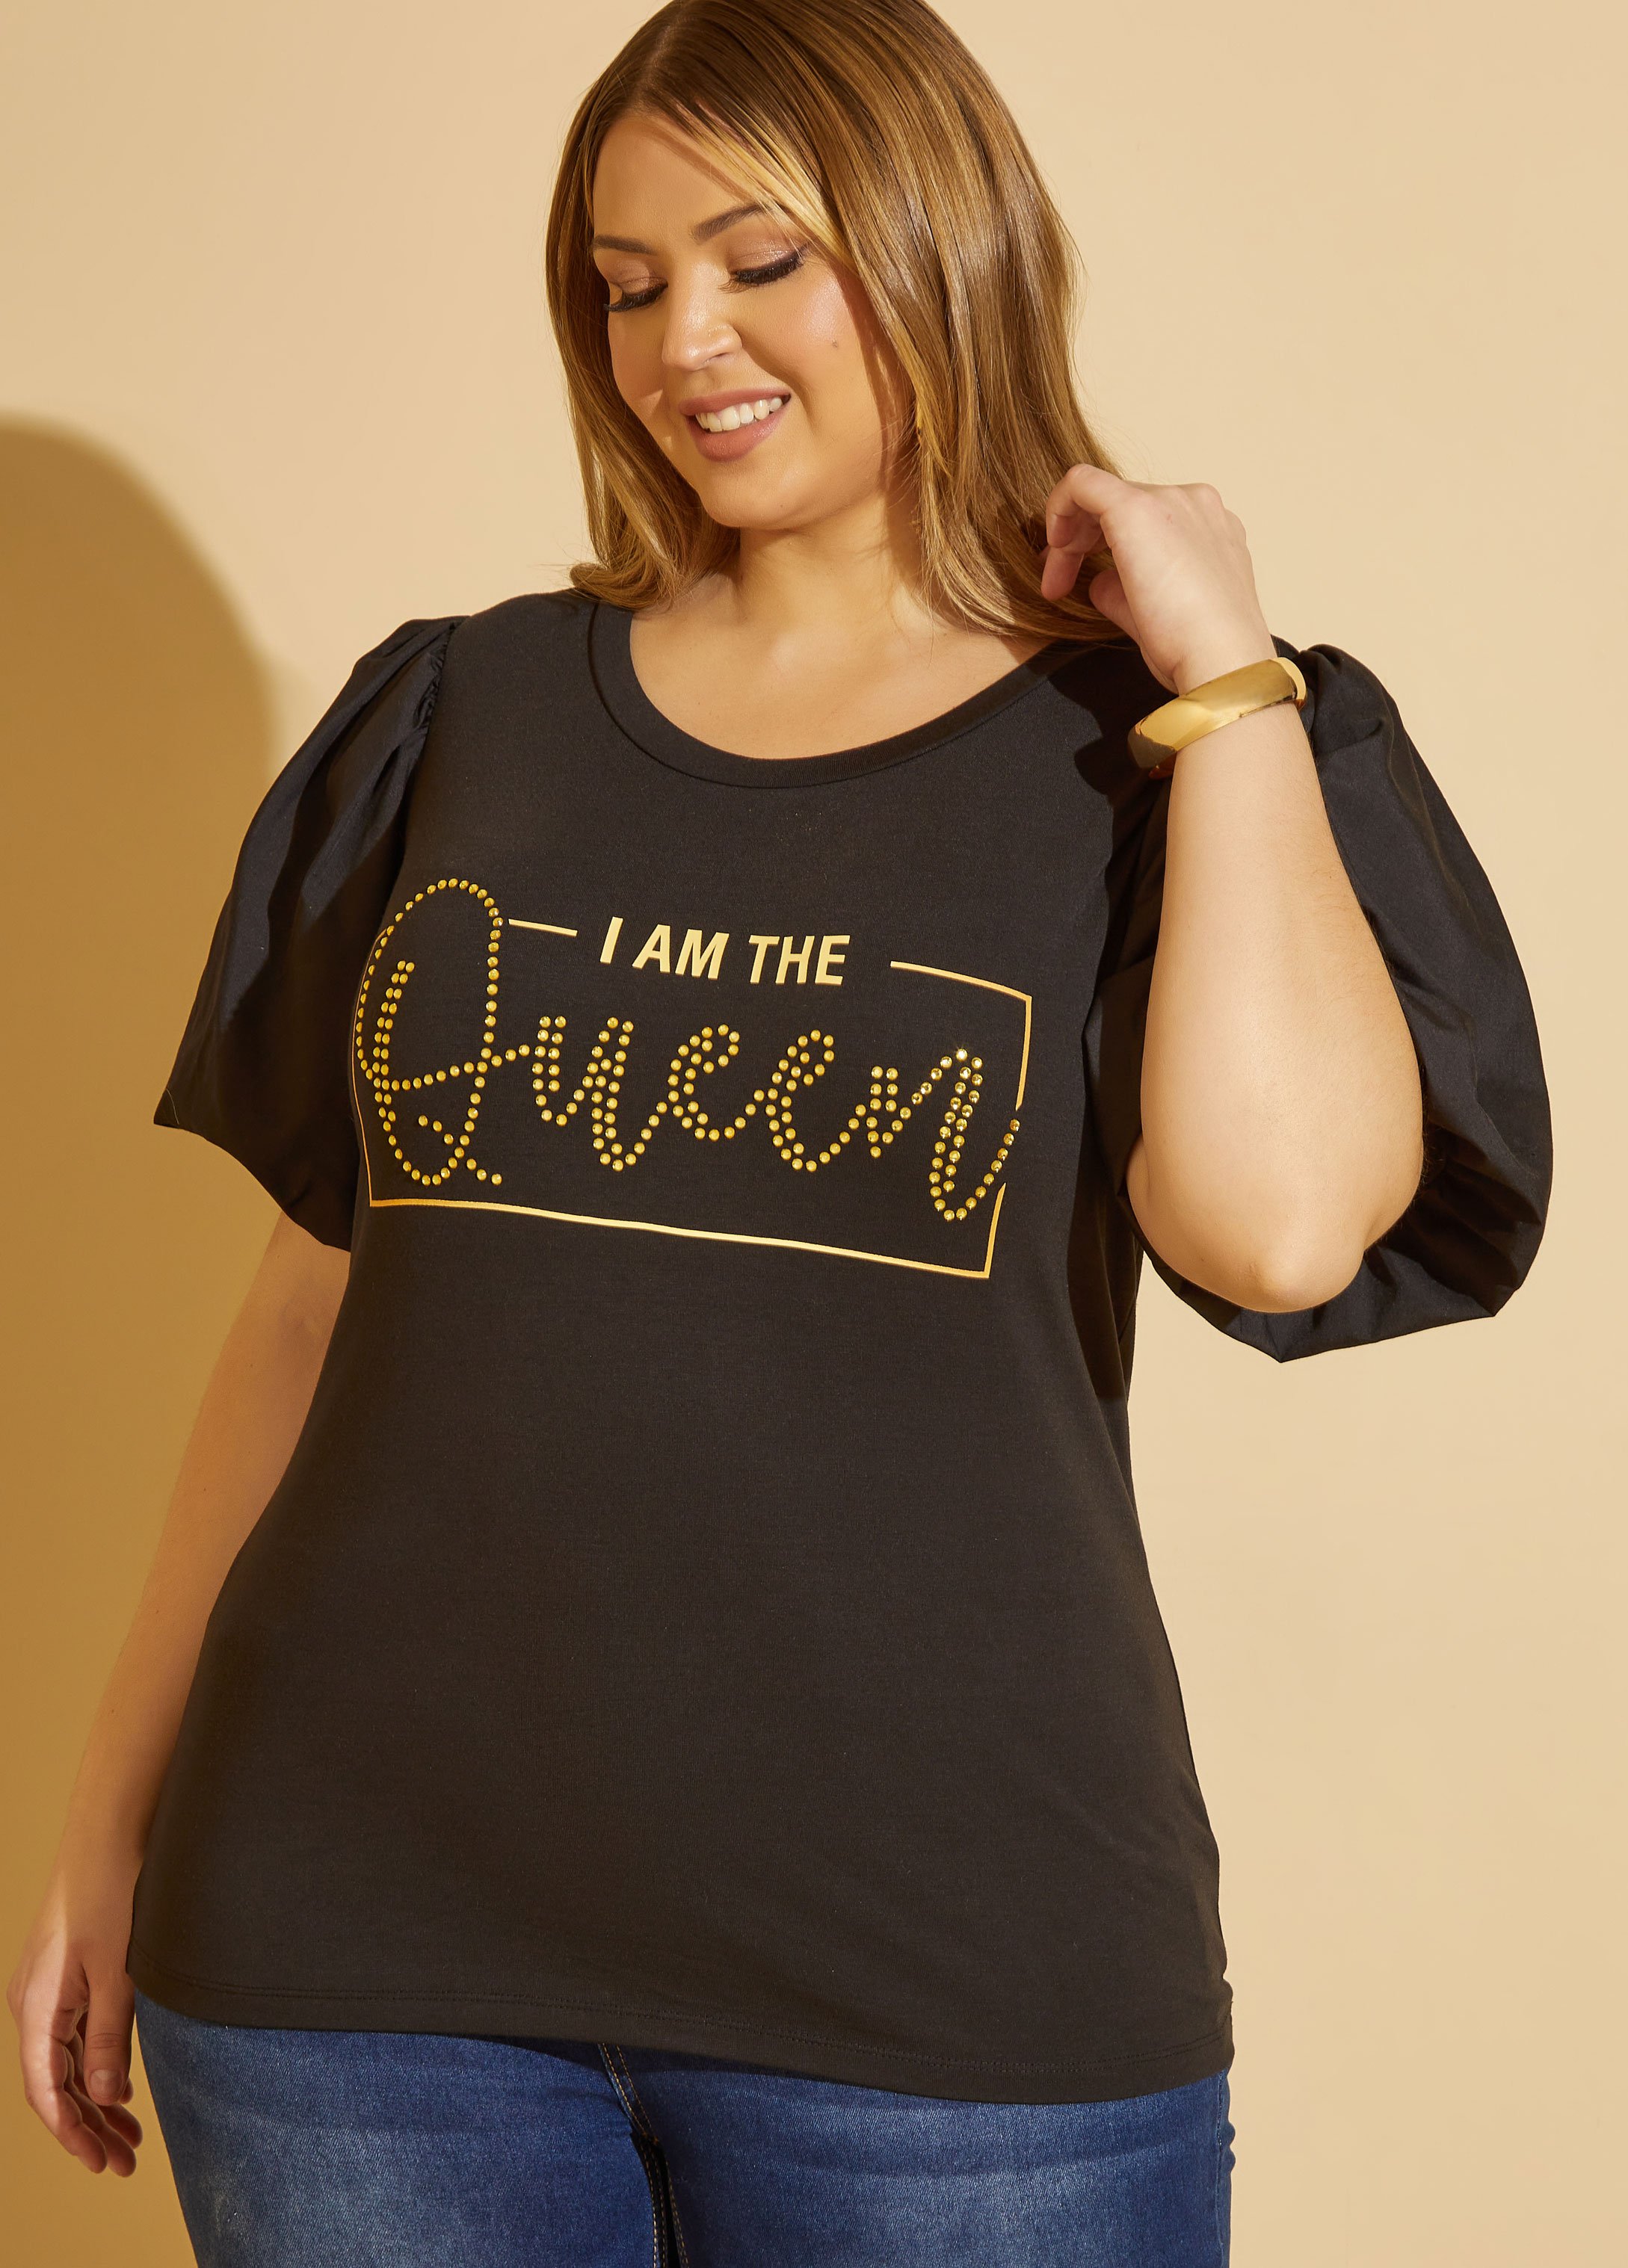 Plus Size I Am The Queen Puff Sleeved Tee, BLACK, 34/36 - Ashley Stewart